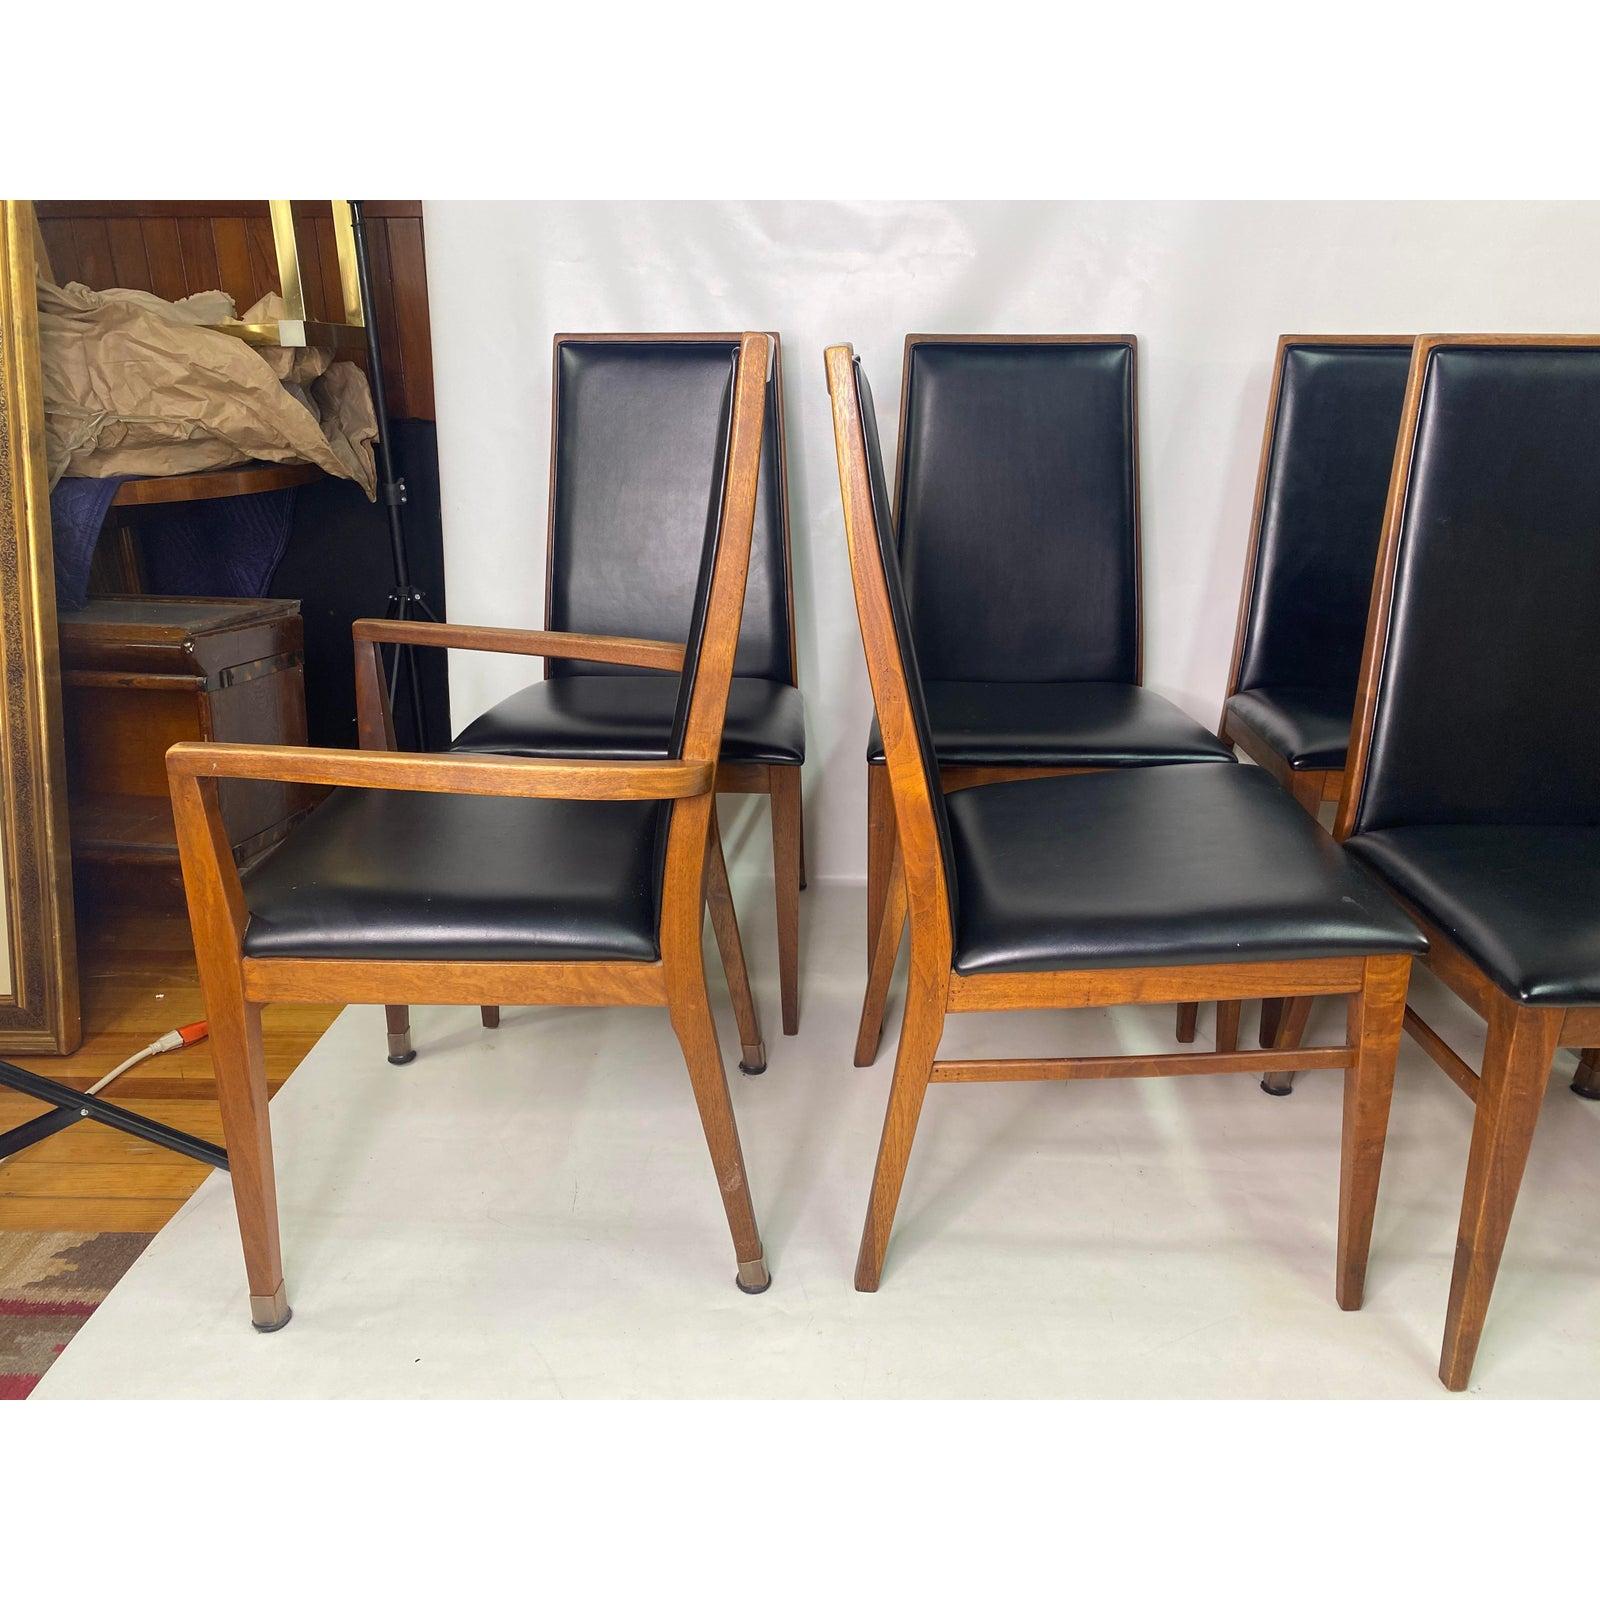 American Milo Baughman Style Walnut Dining Chairs by Dillingham, Set of 2 armless 